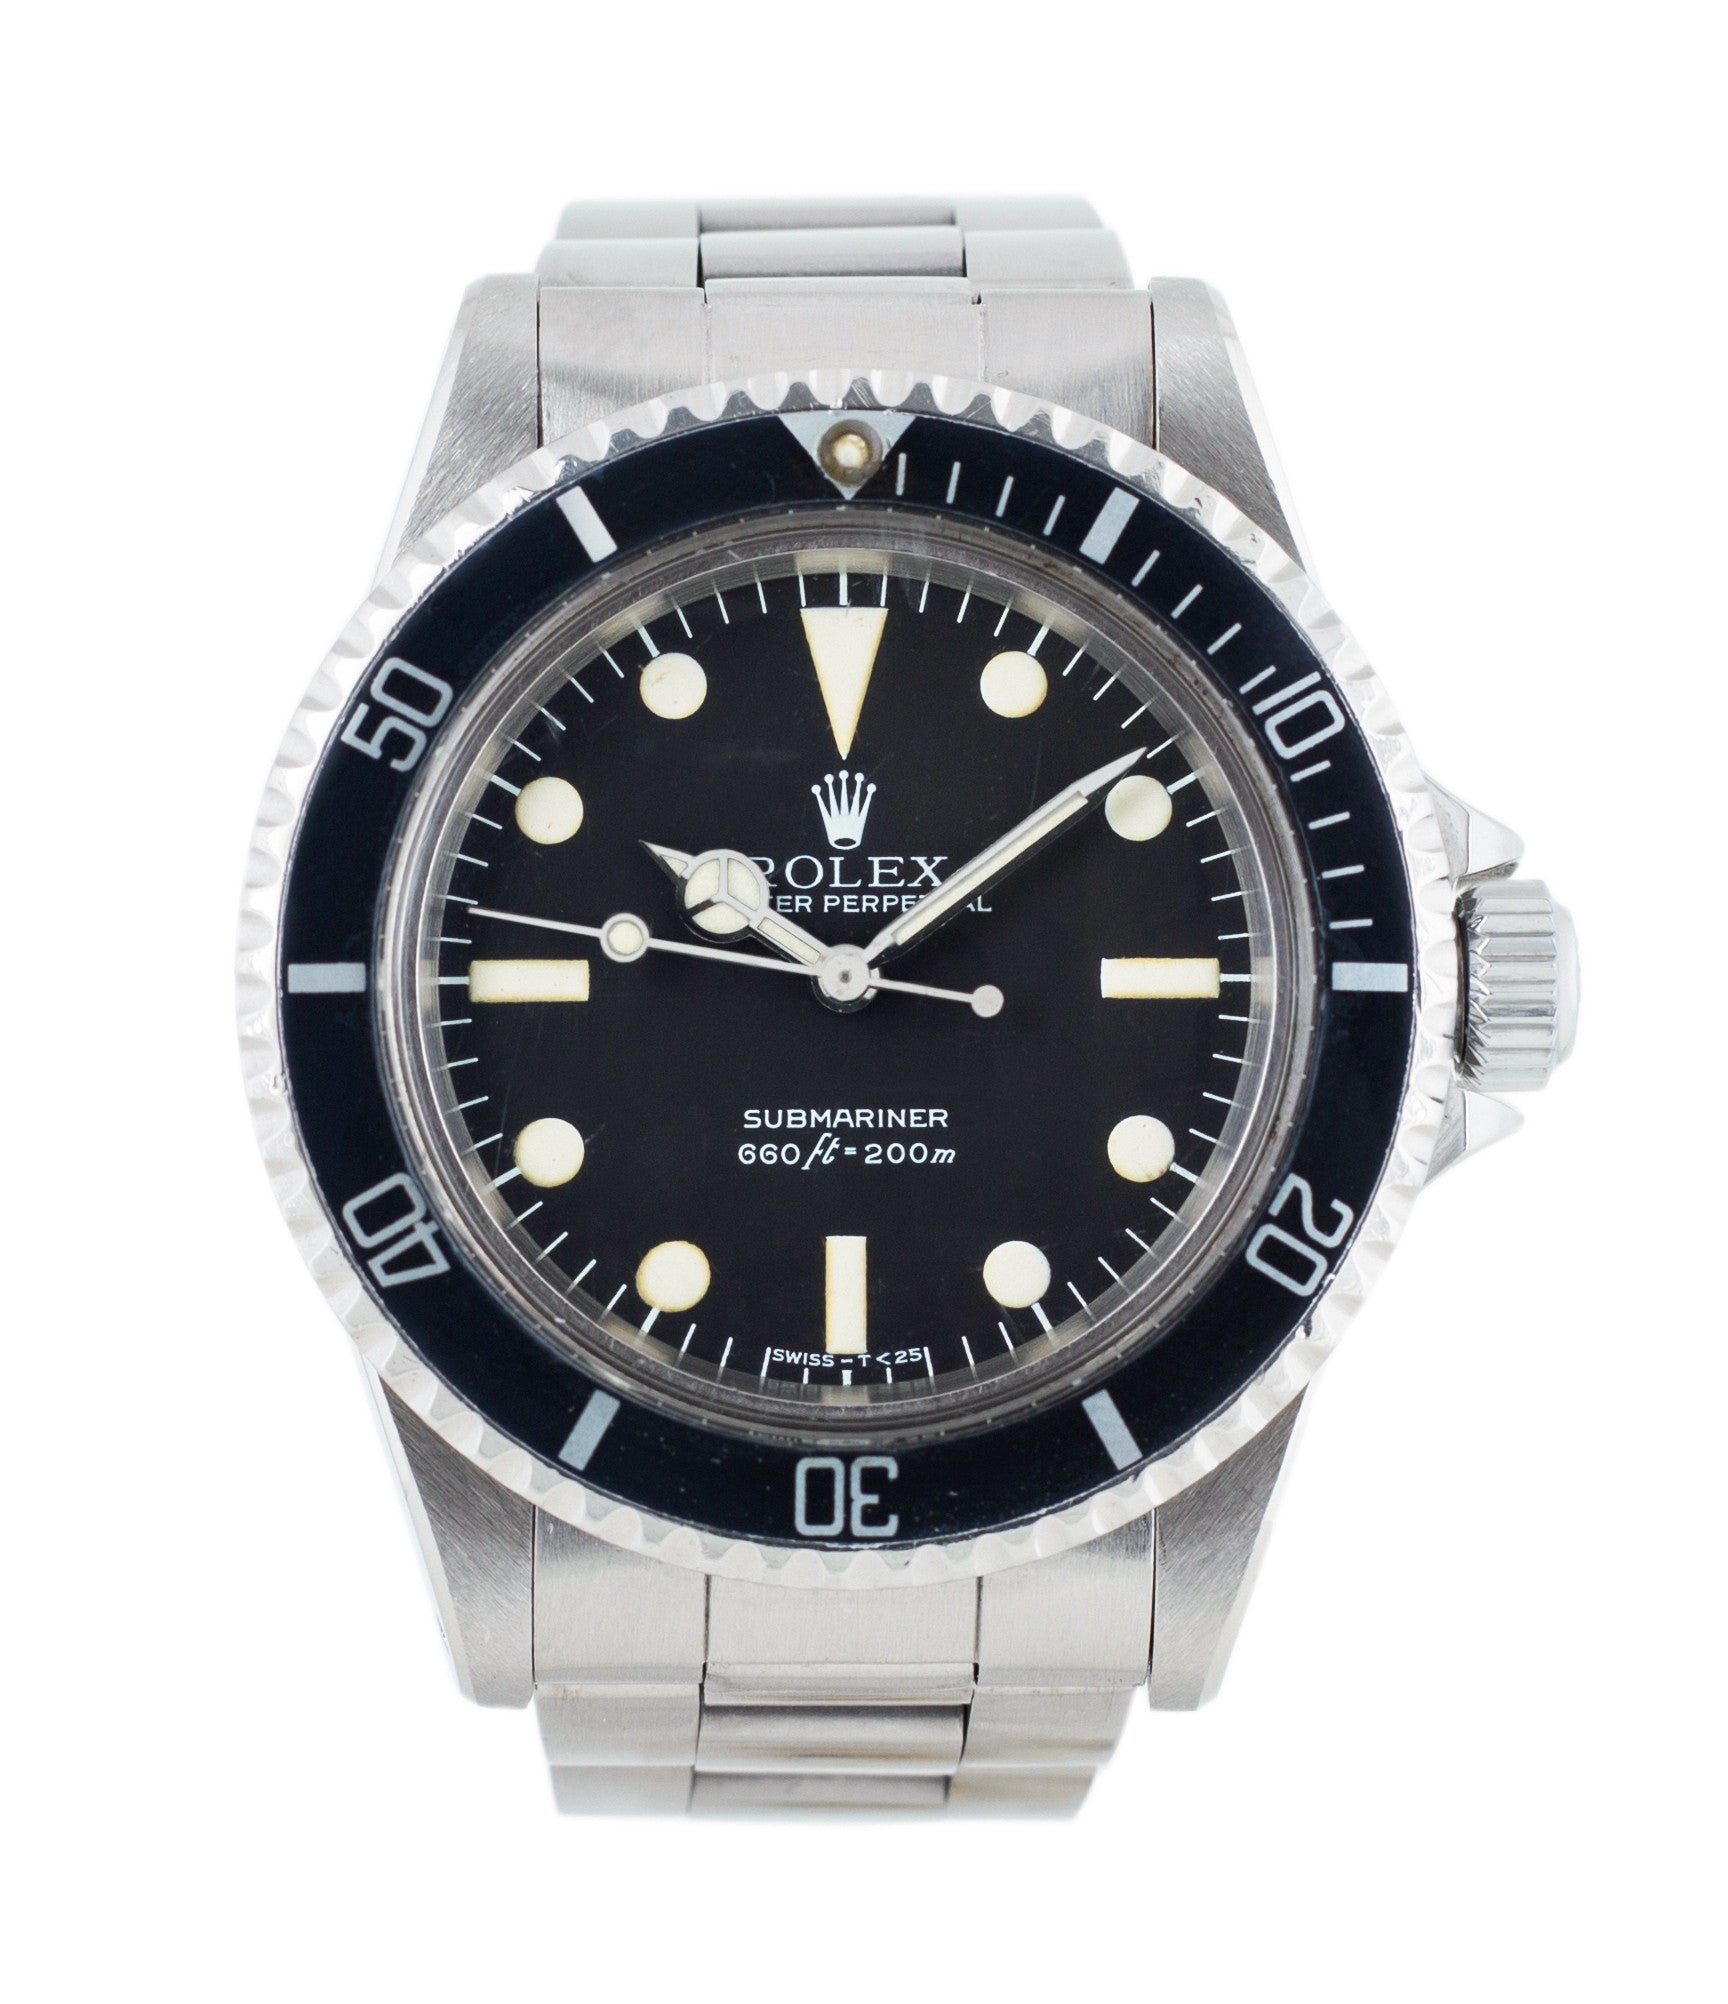 buy Rolex Submariner 5513/0 Maxi Mark III dial steel vintage dateless watch with box and papers for sale online WATCH XCHANGE London with authenticity guaranteed